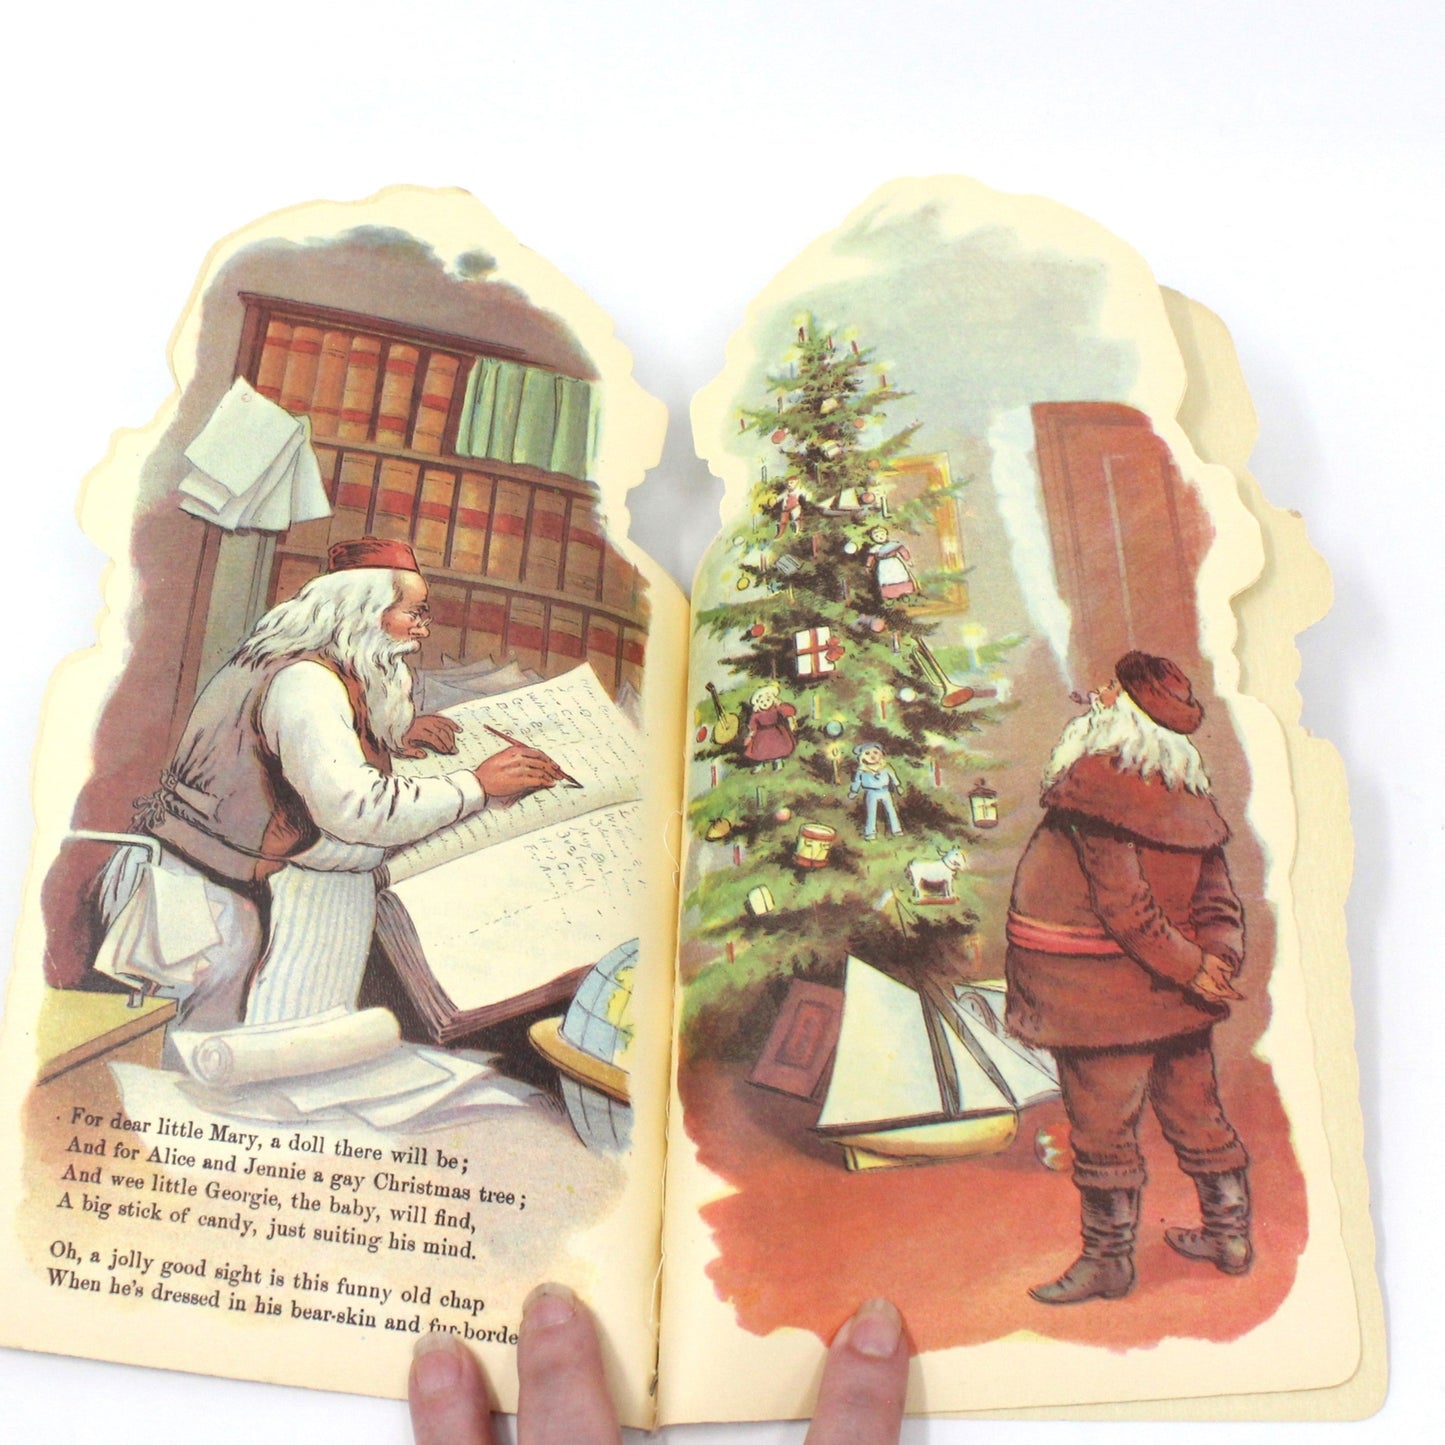 Children's Book, Merrimack Publishing, All About Santa Claus, Softcover Die Cut, Vintage